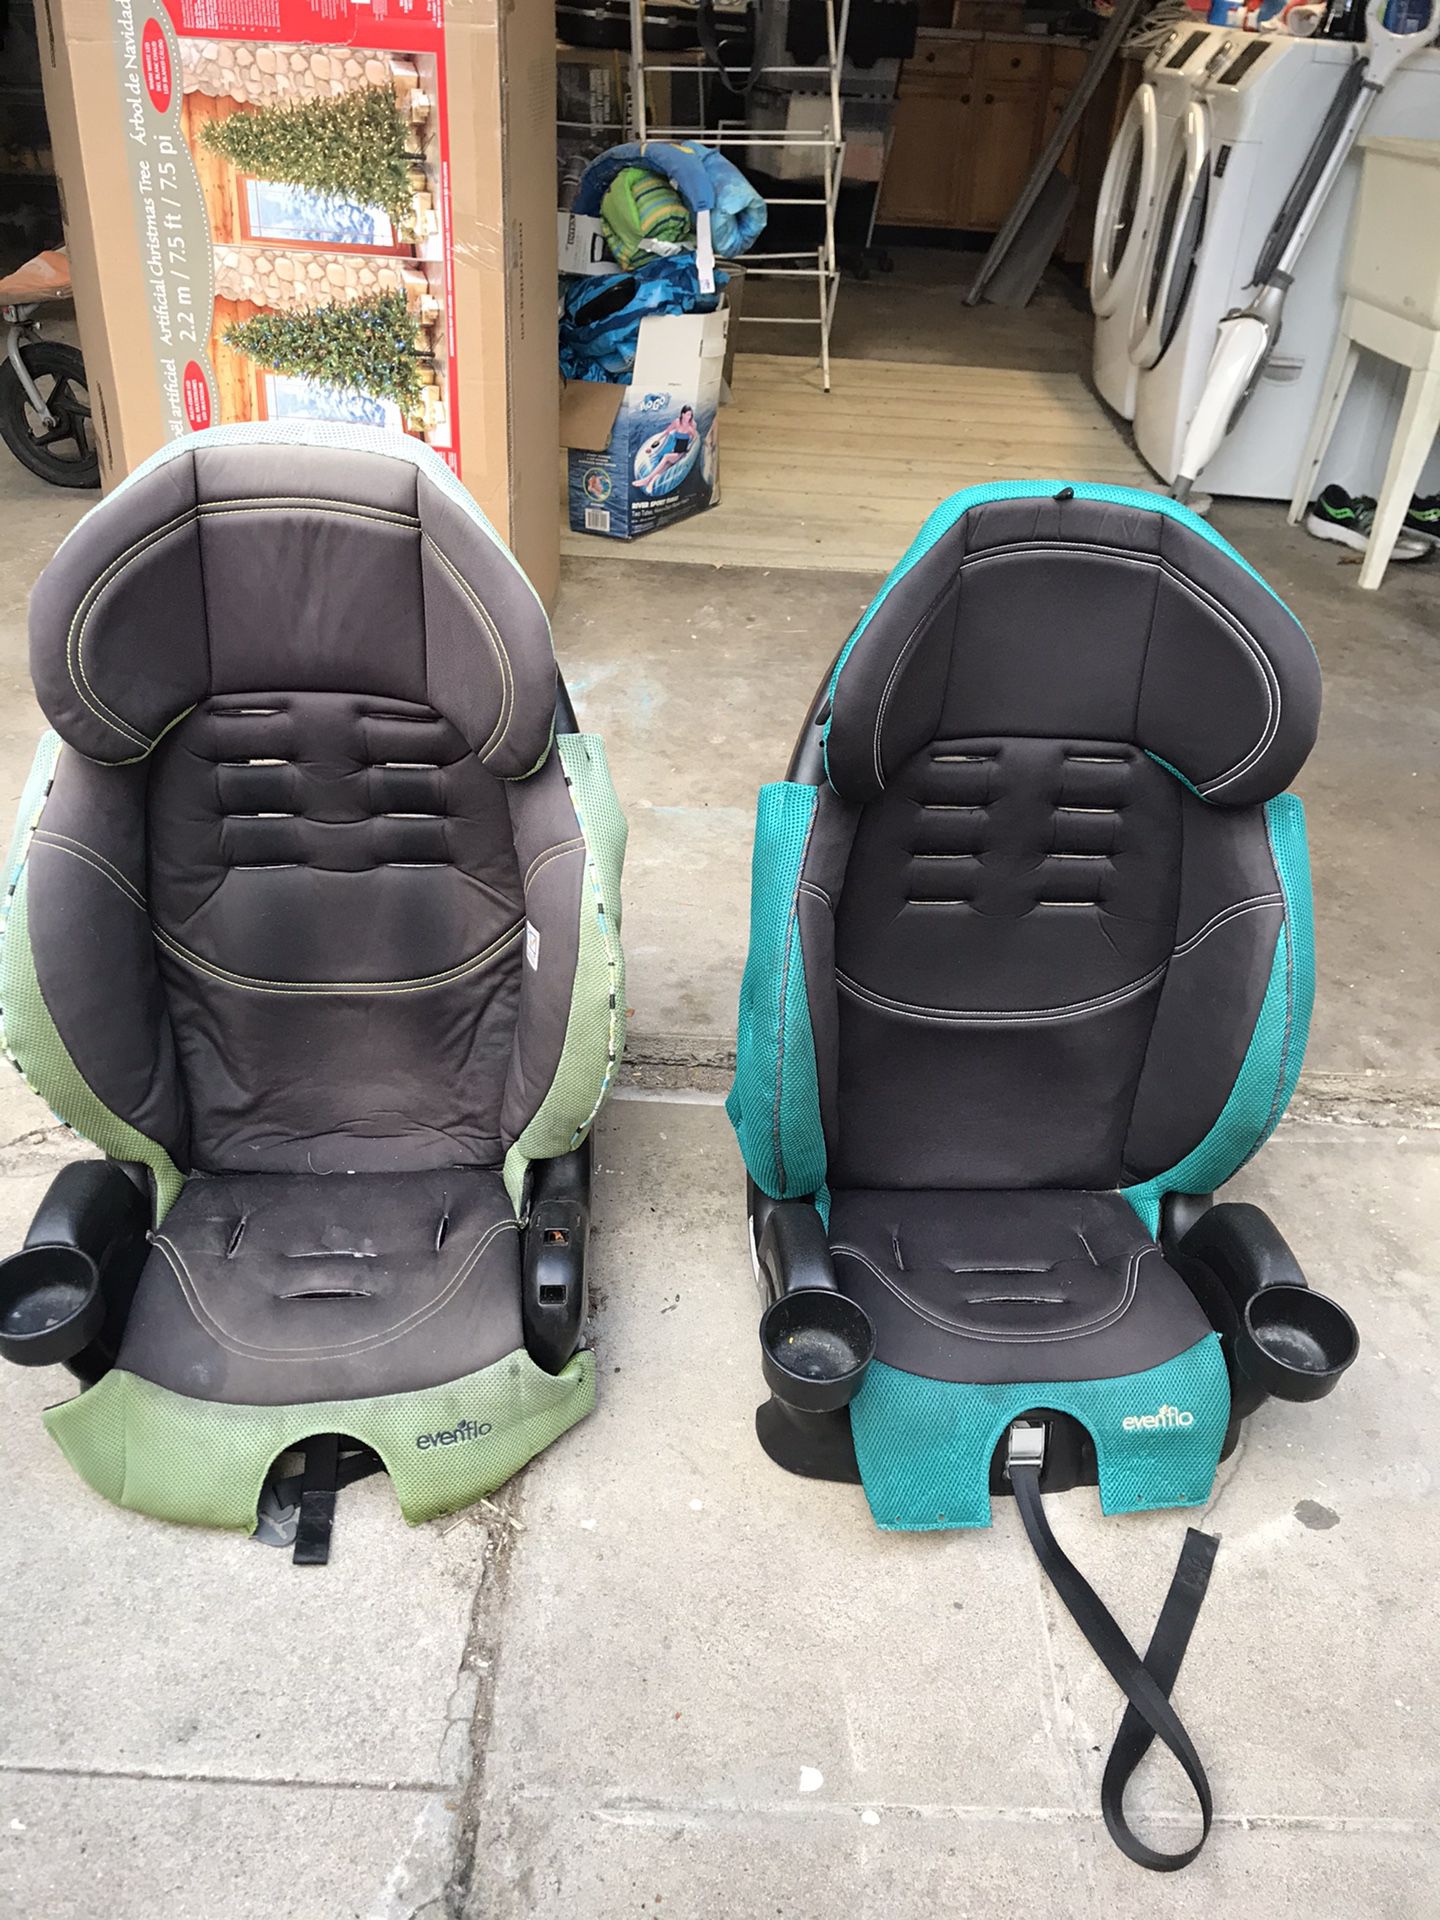 2 FREE BOOSTER SEATS